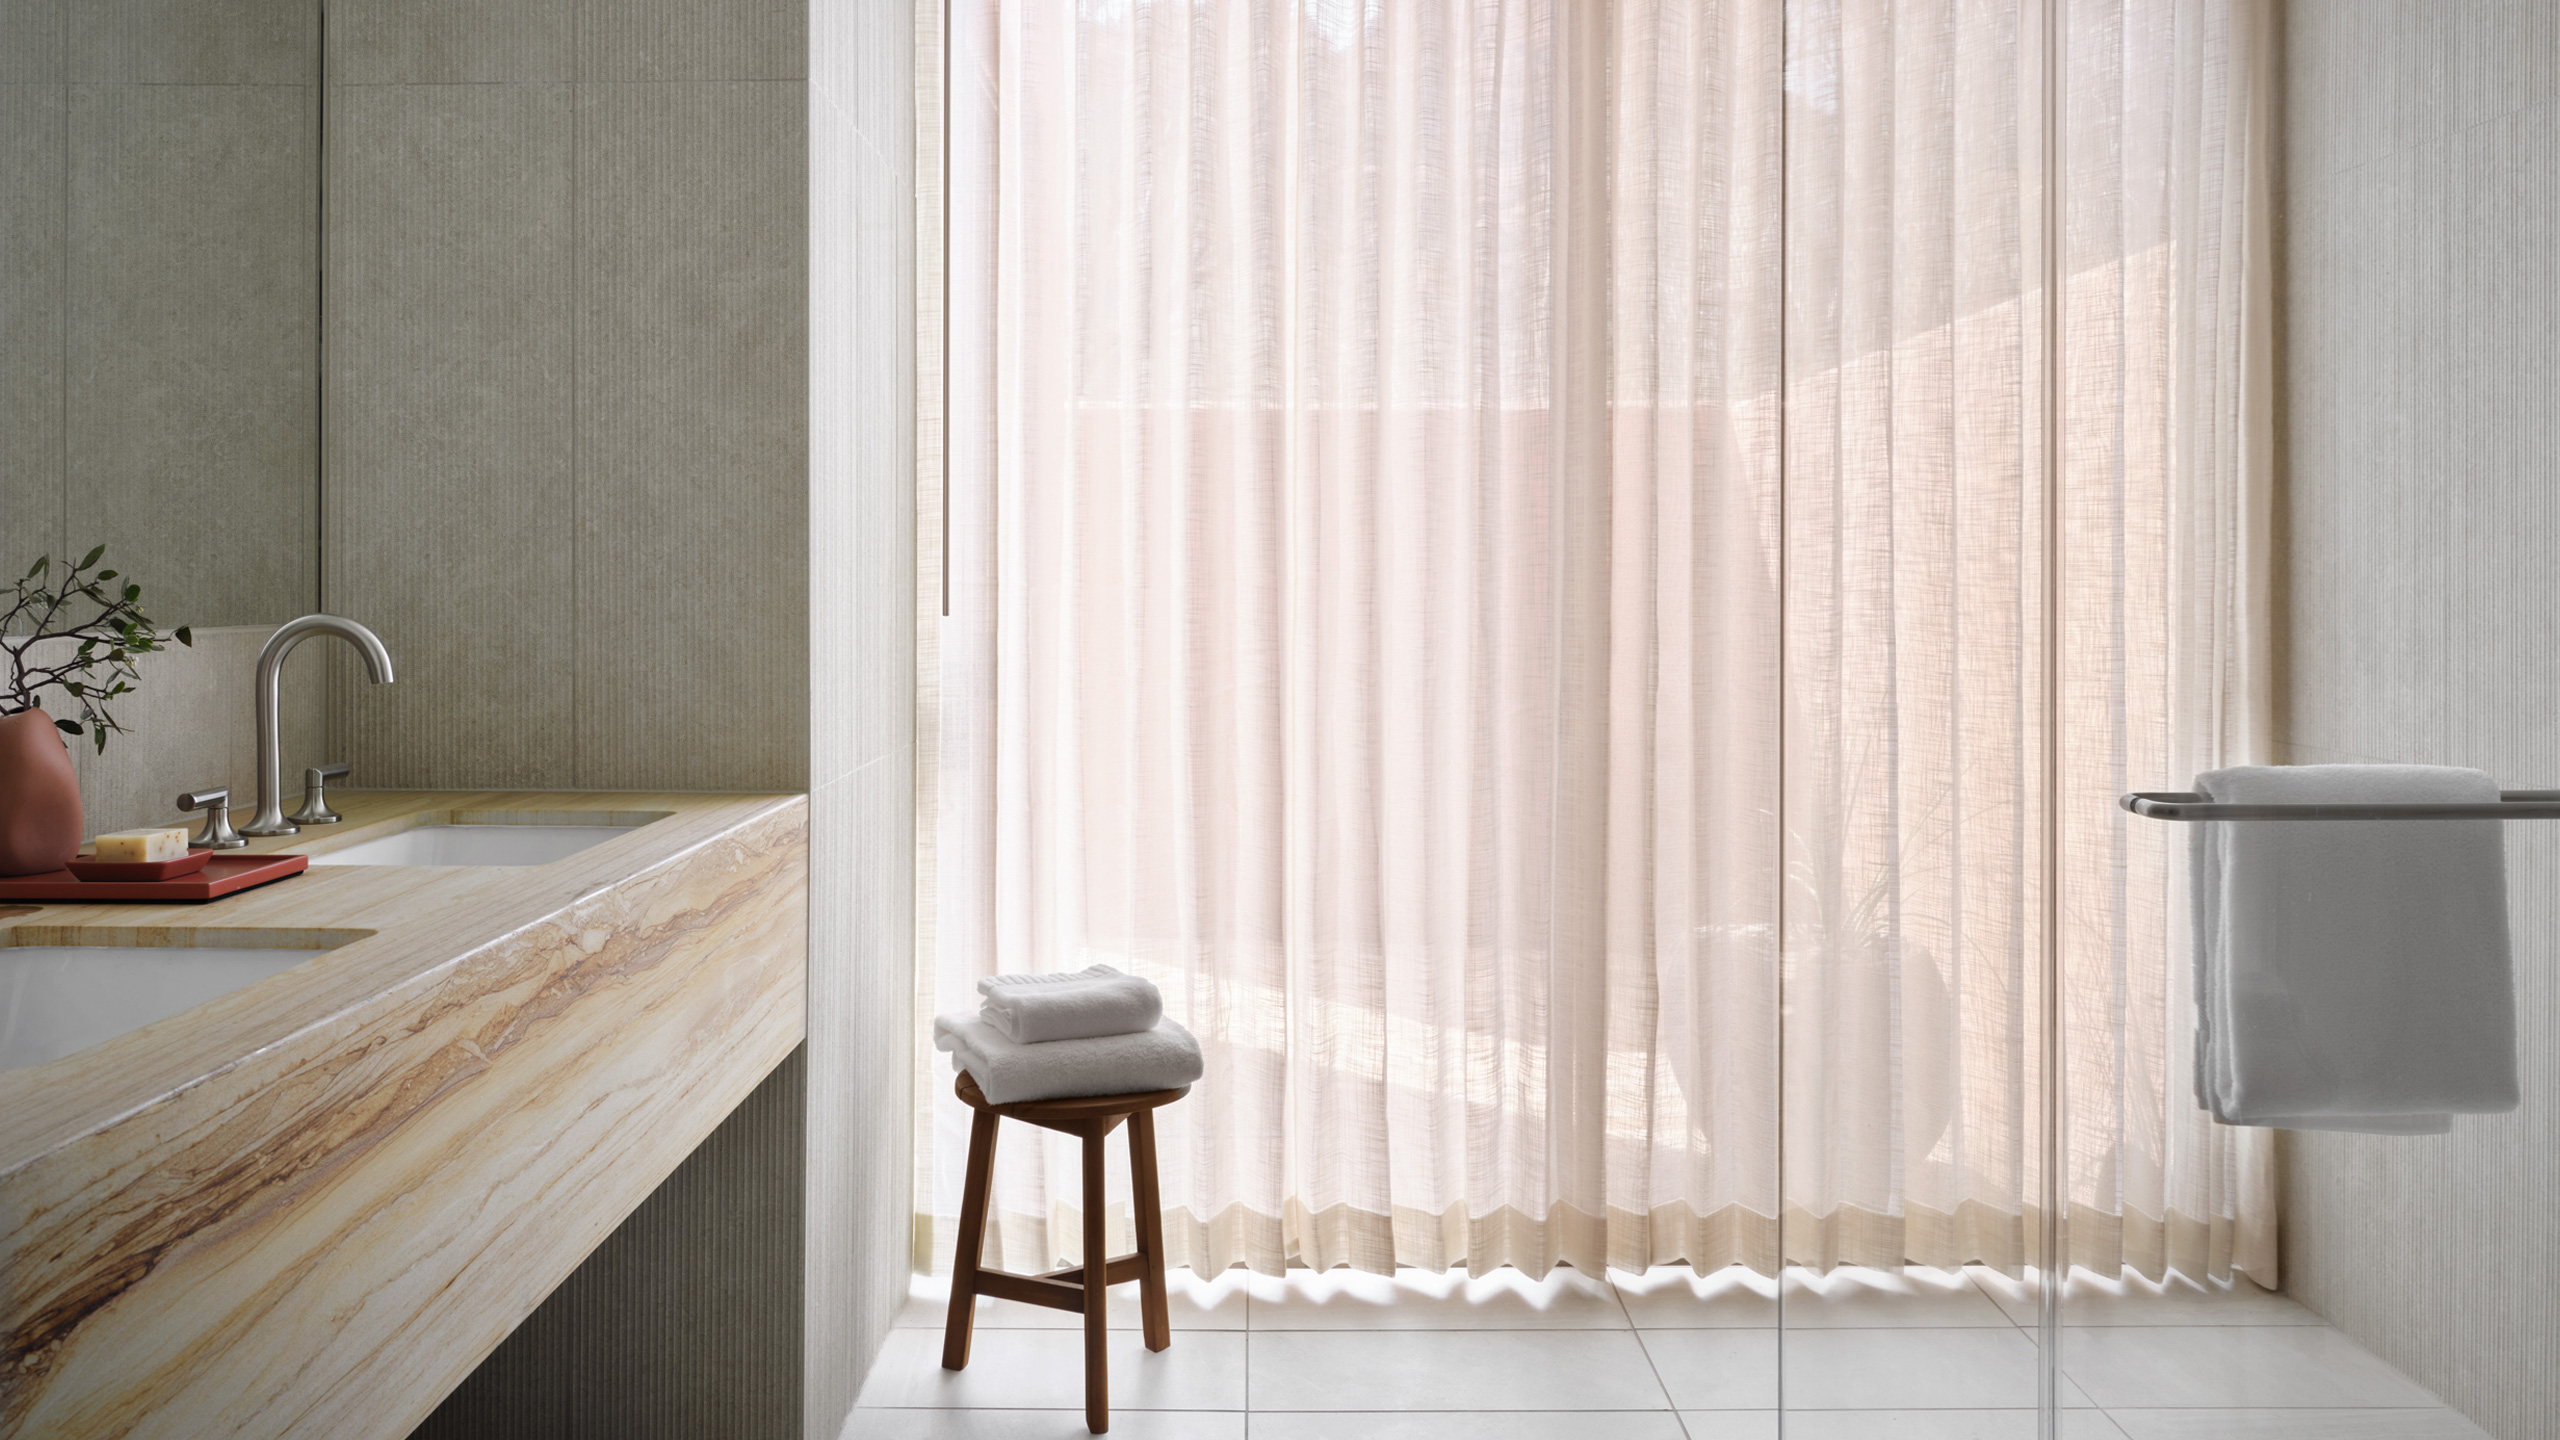 Glass shower with light coming in sheer curtains and stool near window